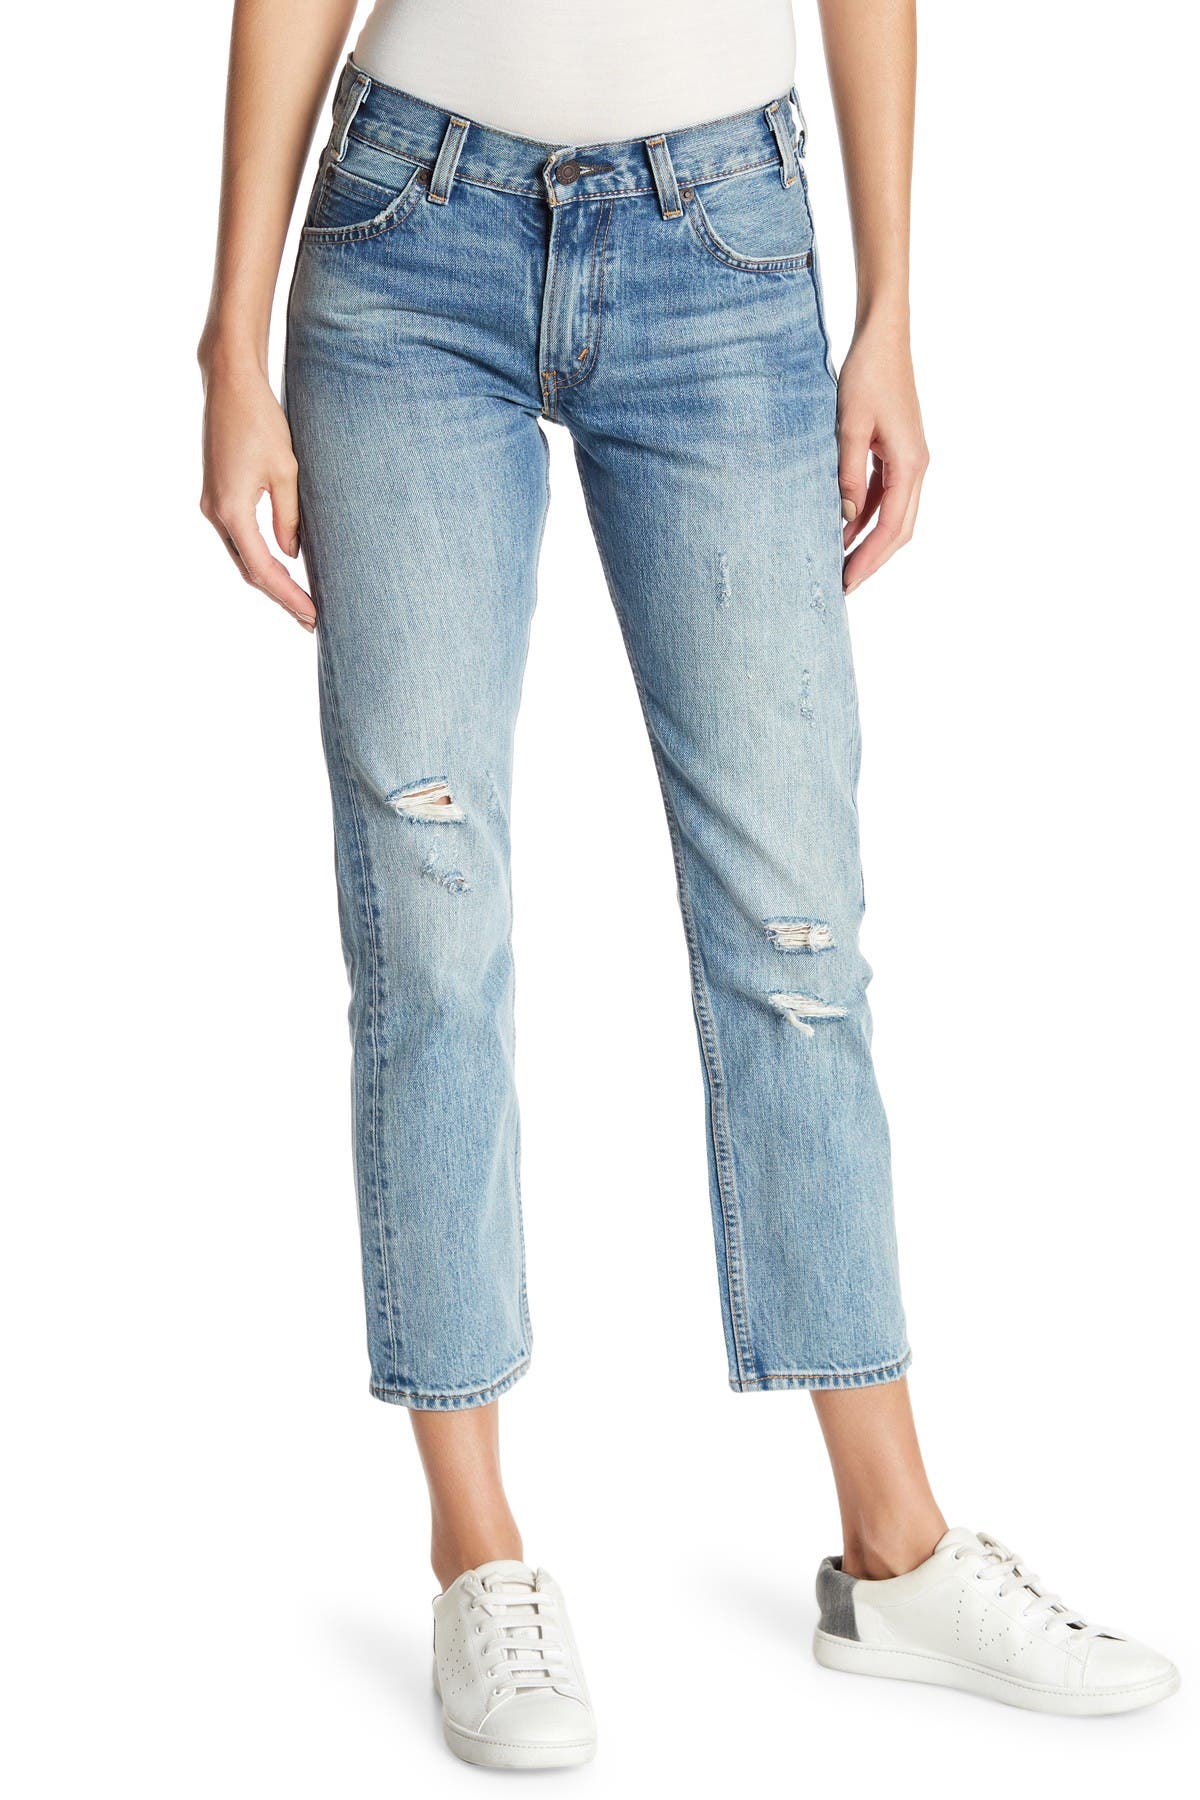 Levi's | 505 Cropped Jeans | Nordstrom Rack